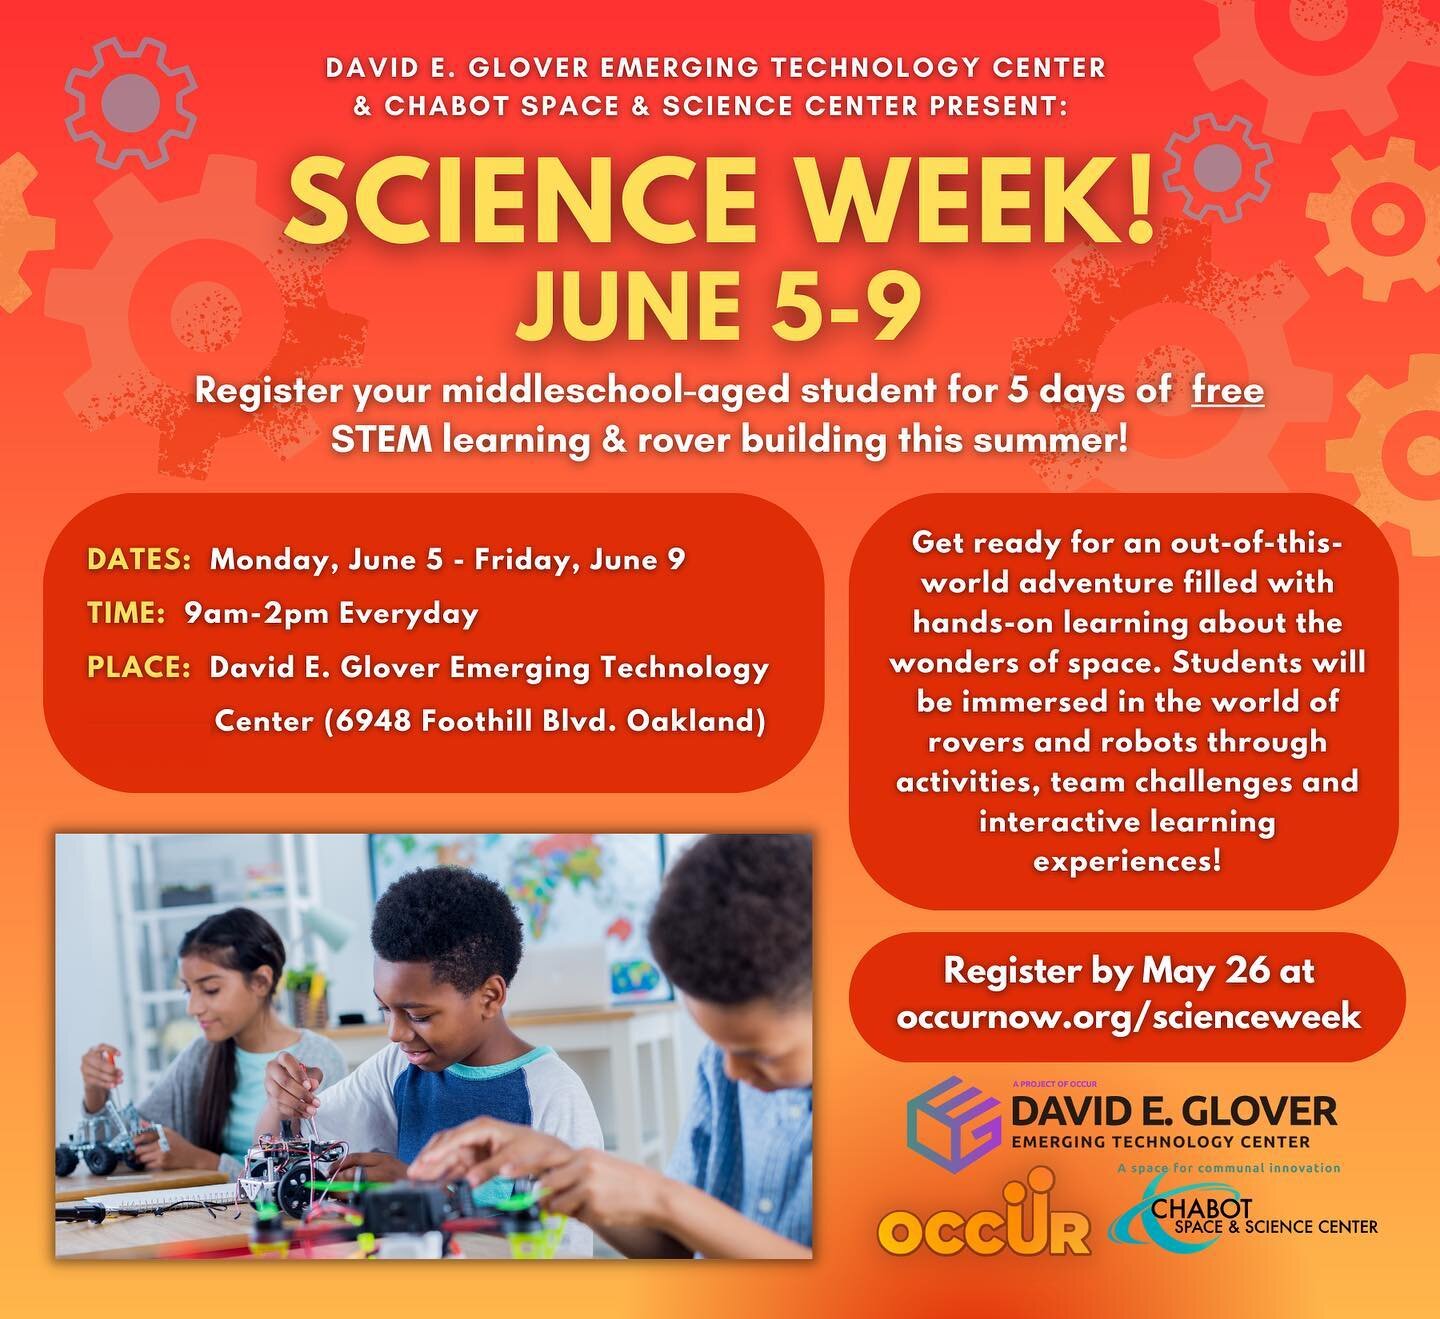 Science Week is here! Get ready for an out-of-this-world adventure filled with hands-on learning about the wonders of space. Students will be immersed in the world of rovers and robots through activities, team challenges and interactive learning expe